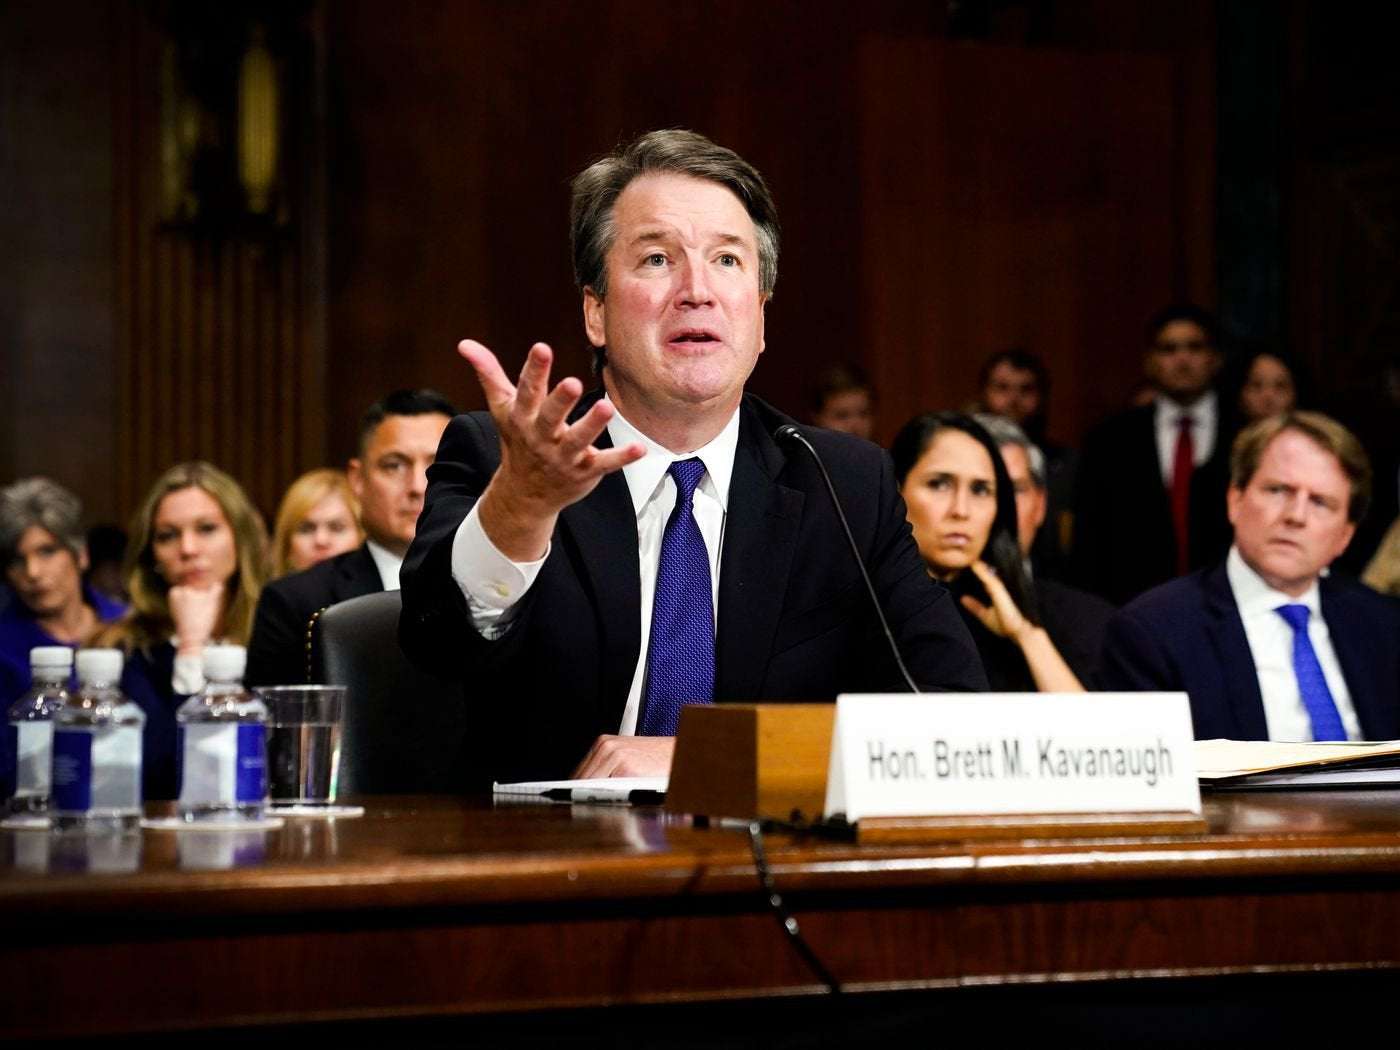 image for Did Brett Kavanaugh perjure himself during his confirmation hearing?